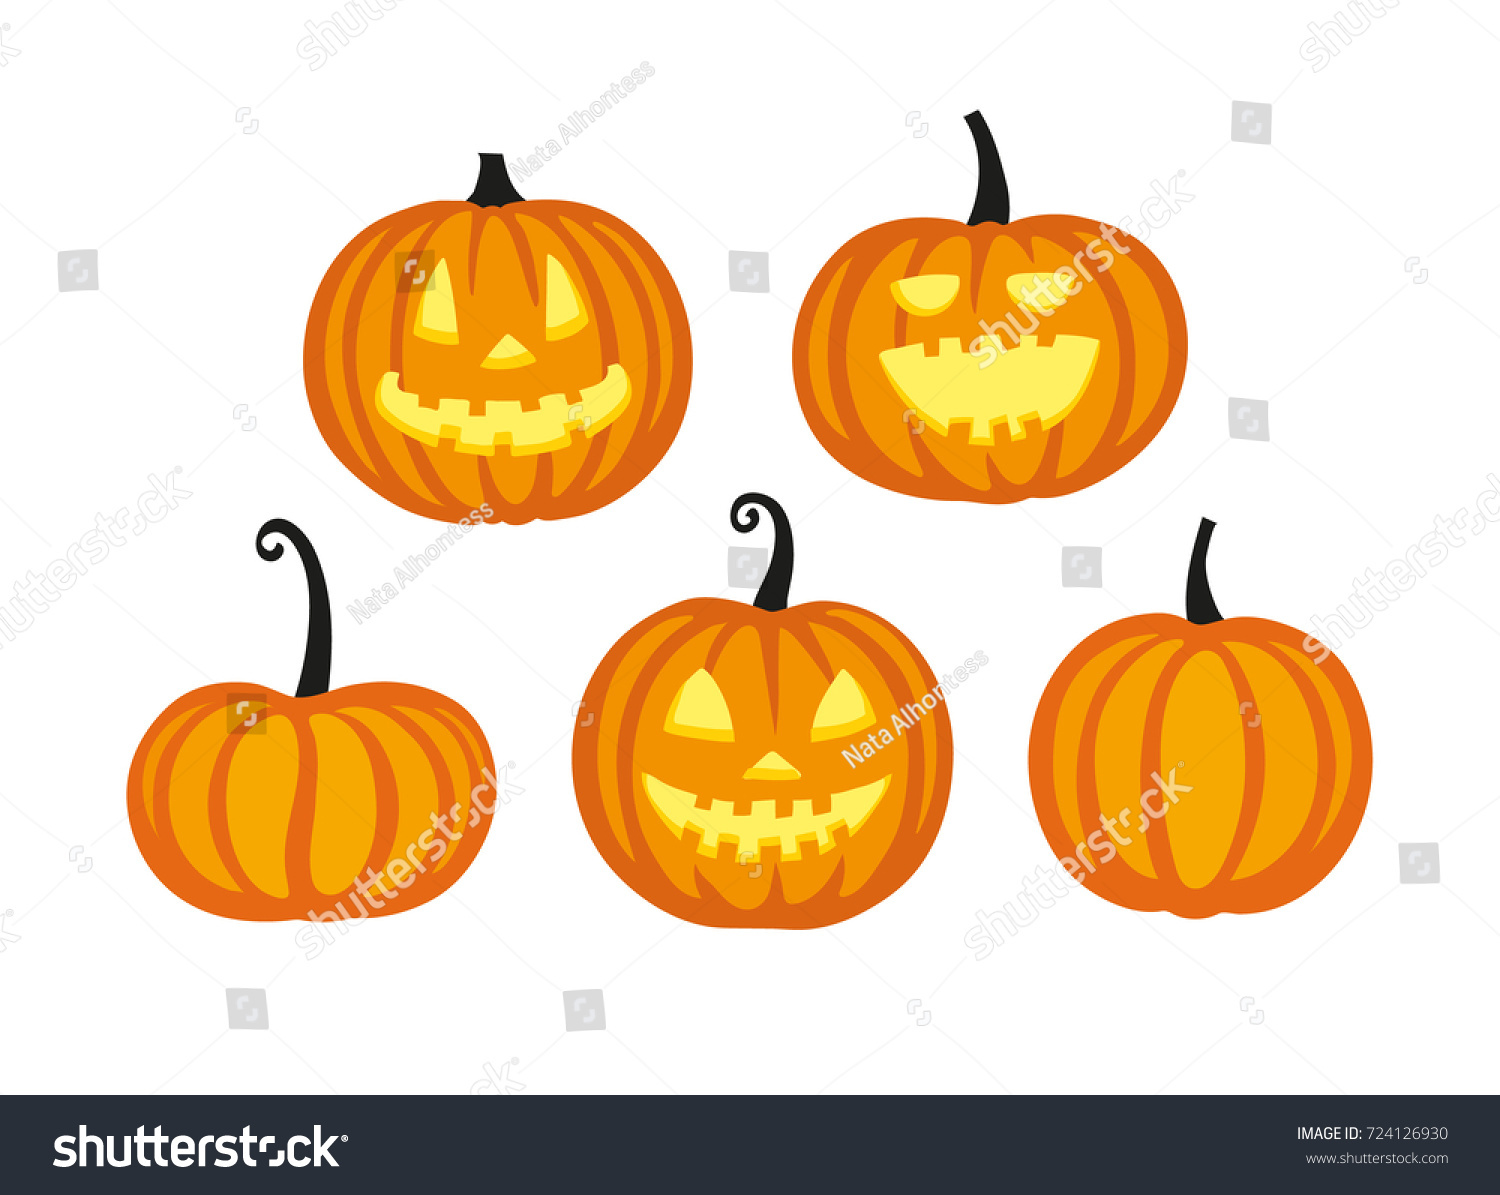 Cute halloween pumpkins. Isolated on white background. Flat style vector illustration. #724126930